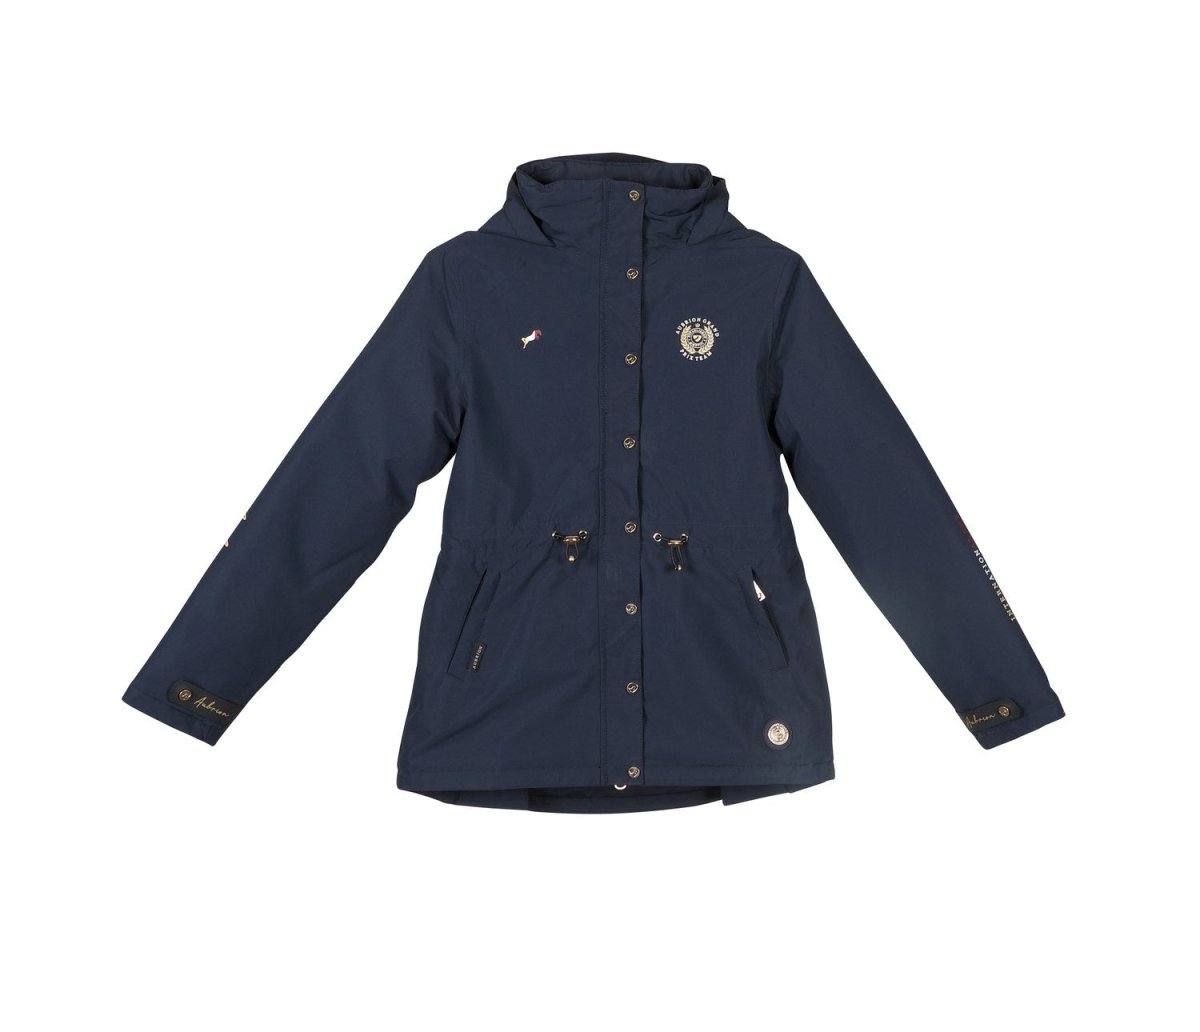 Aubrion Team Waterproof Coat - Young Rider - Navy - 11/12 Yrs